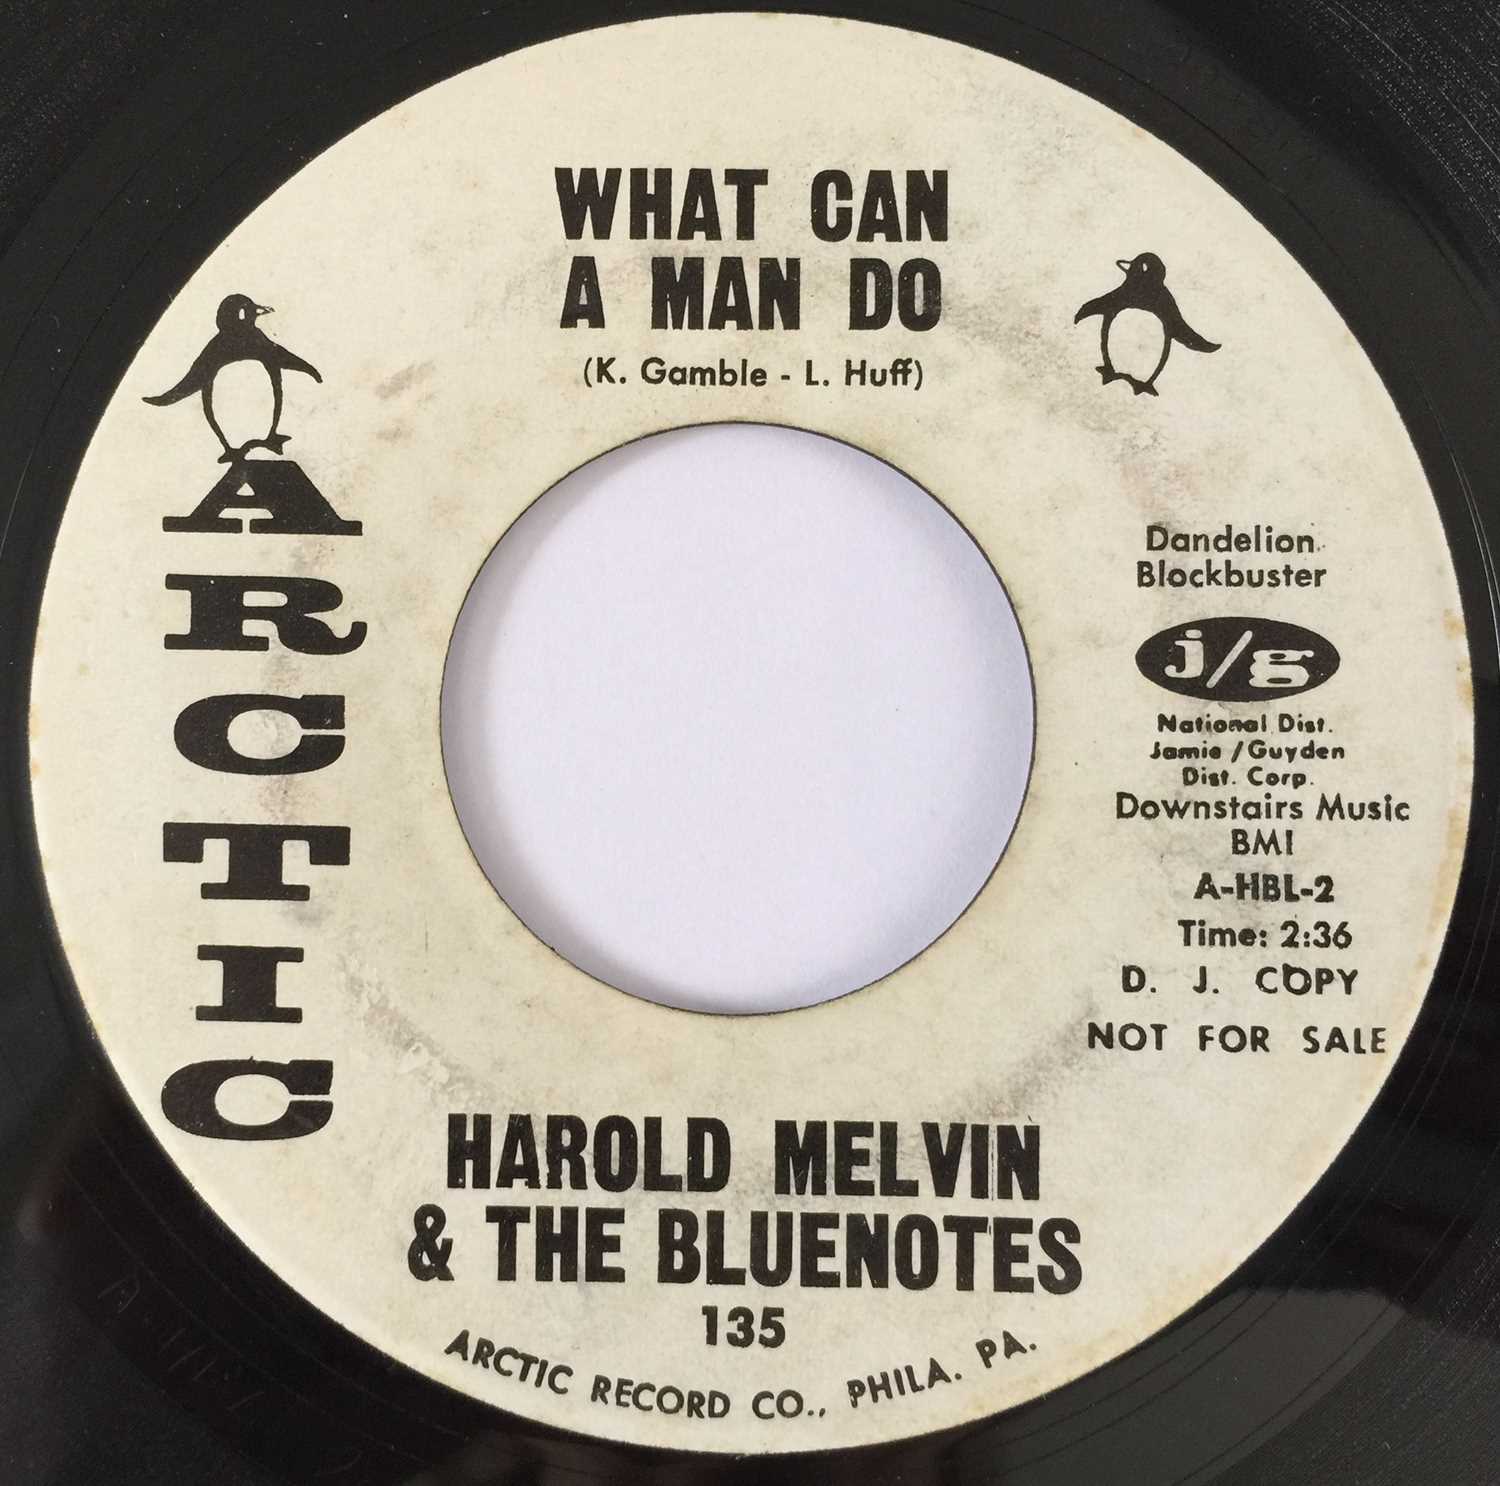 Lot 40 - HAROLD MELVIN & THE BLUENOTES - WHAT CAN A MAN DO/ GO AWAY 7" (US PROMO - ARCTIC 135)